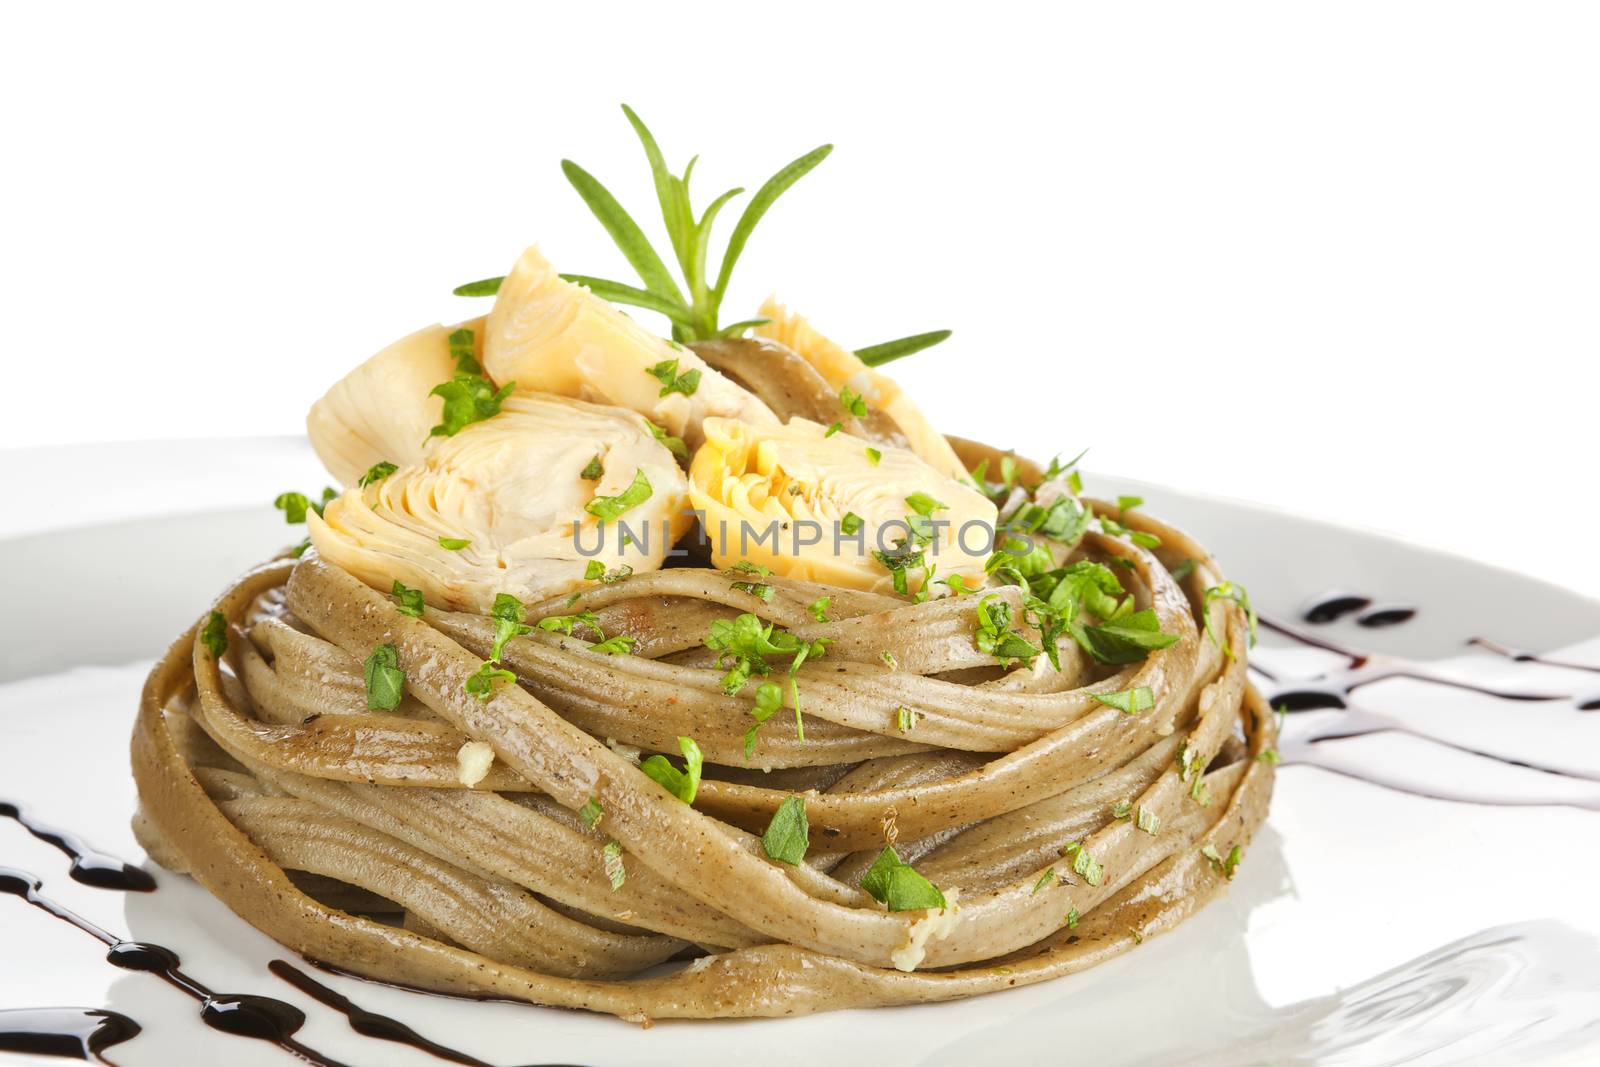 Homemade tagliatelle pasta with artichoke and fresh herbs on white plate. Luxury dining.